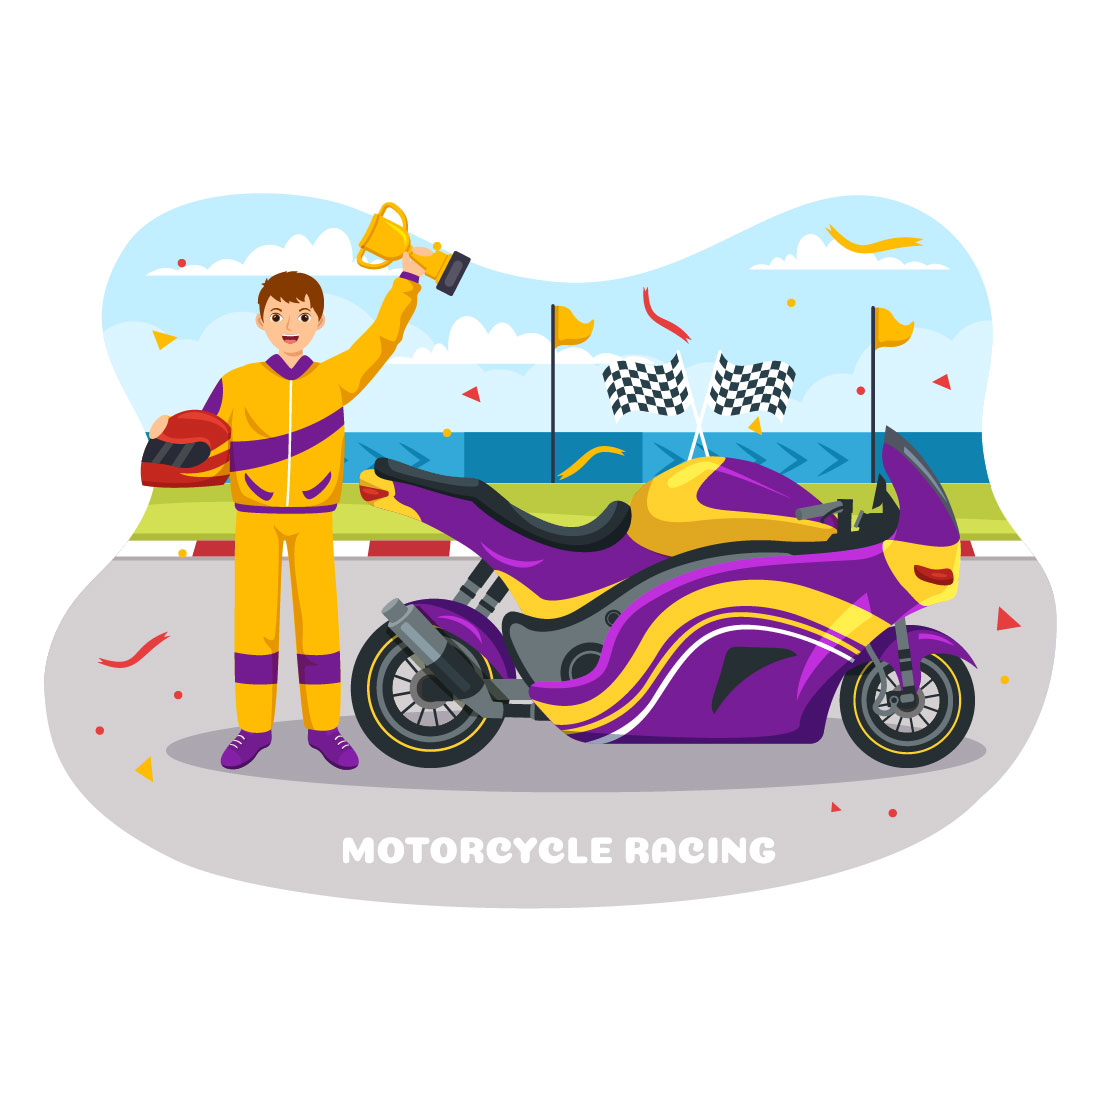 12 Motorcycle Racing Championship Illustration cover image.